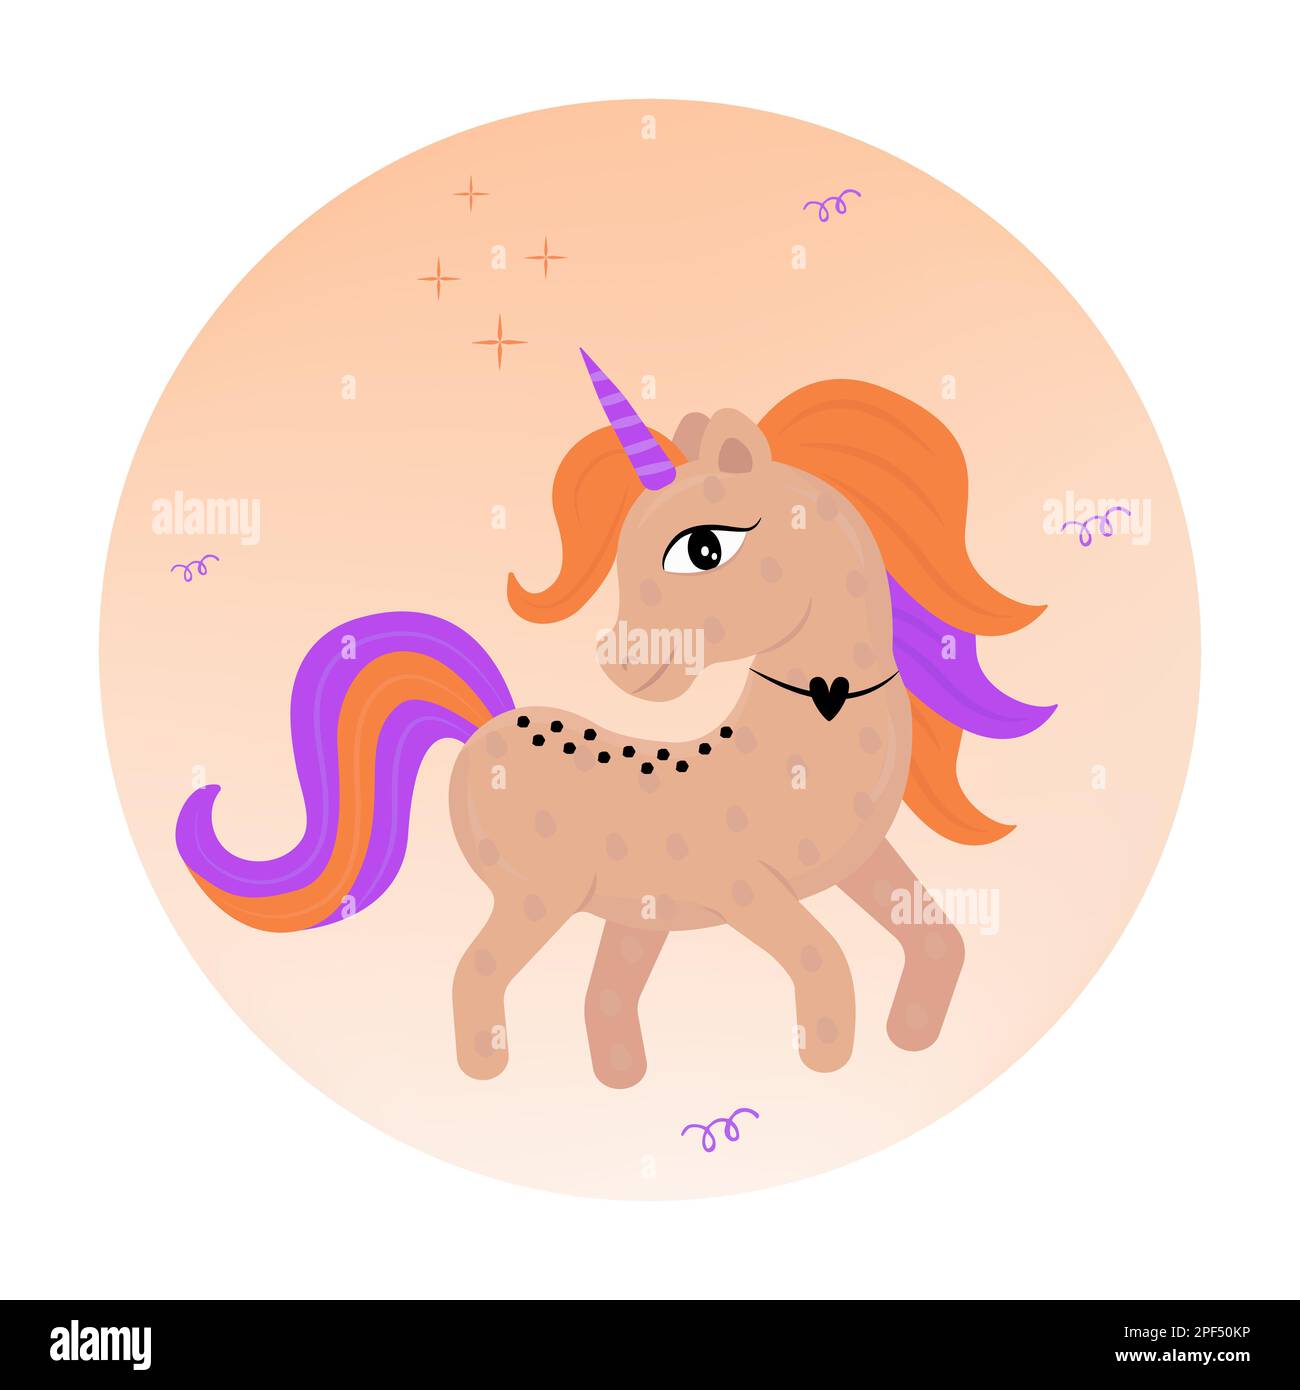 Unicorn and moon, vector illustration in beige, orange, violet and brown colors Stock Vector